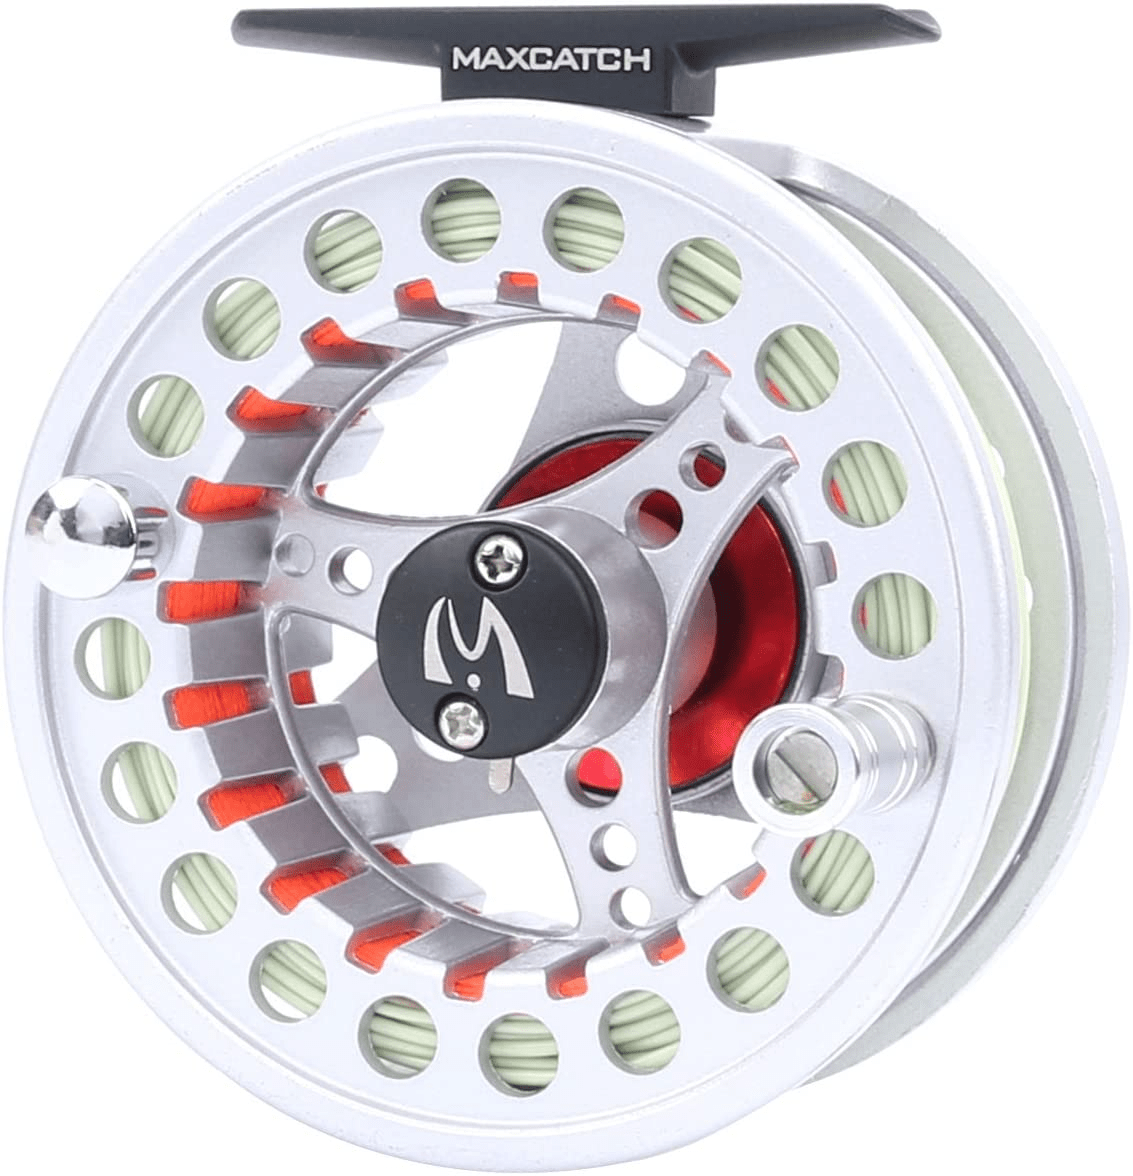 Maxcatch Large Arbor Fly Fishing Reel (3/4Wt 5/6Wt 7/8Wt) and Pre